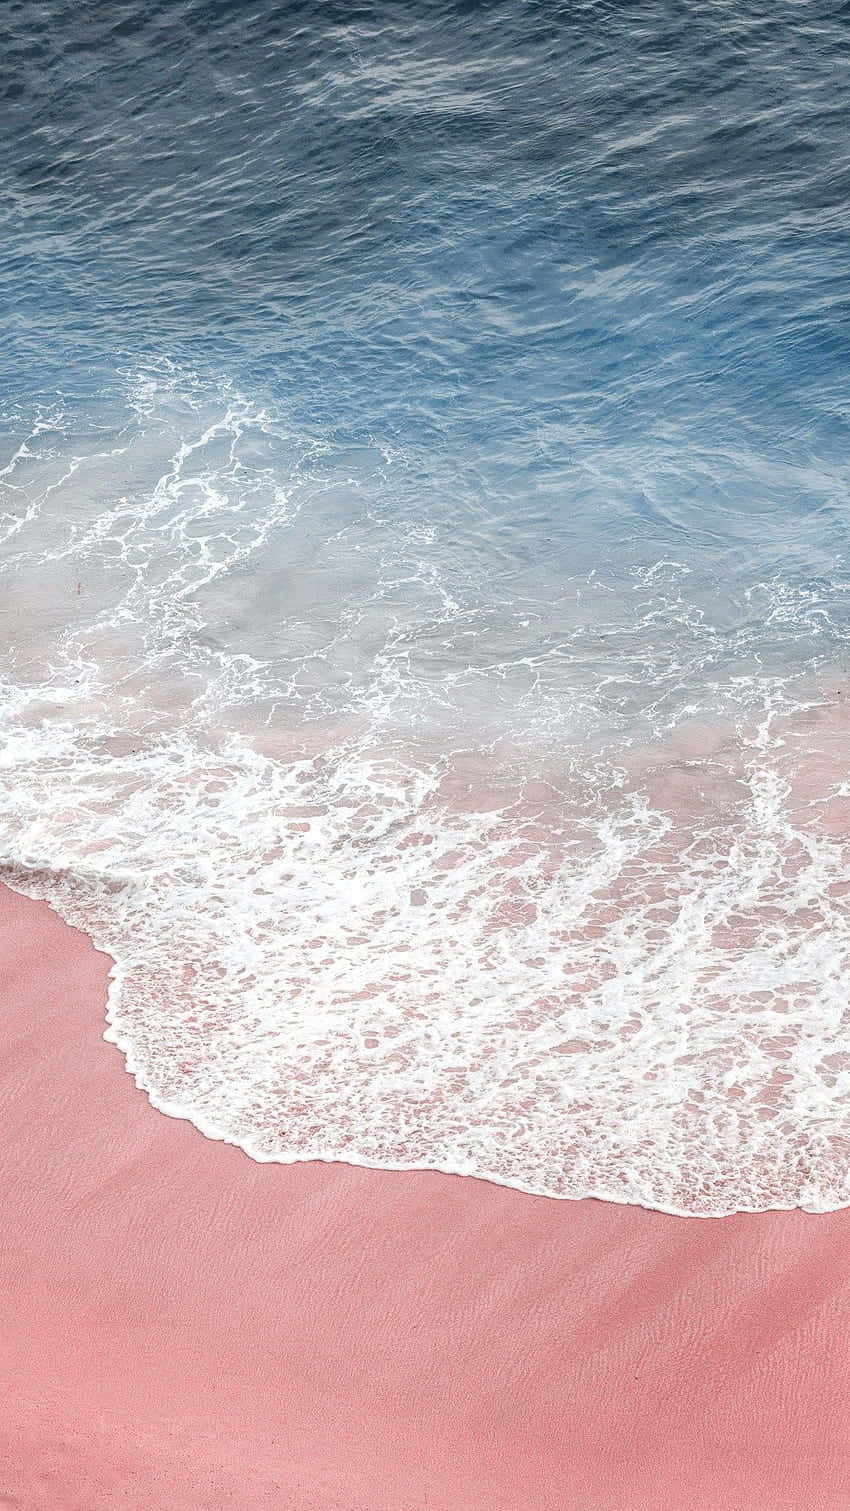 Download A Pink Sand Beach With Waves Wallpaper | Wallpapers.com